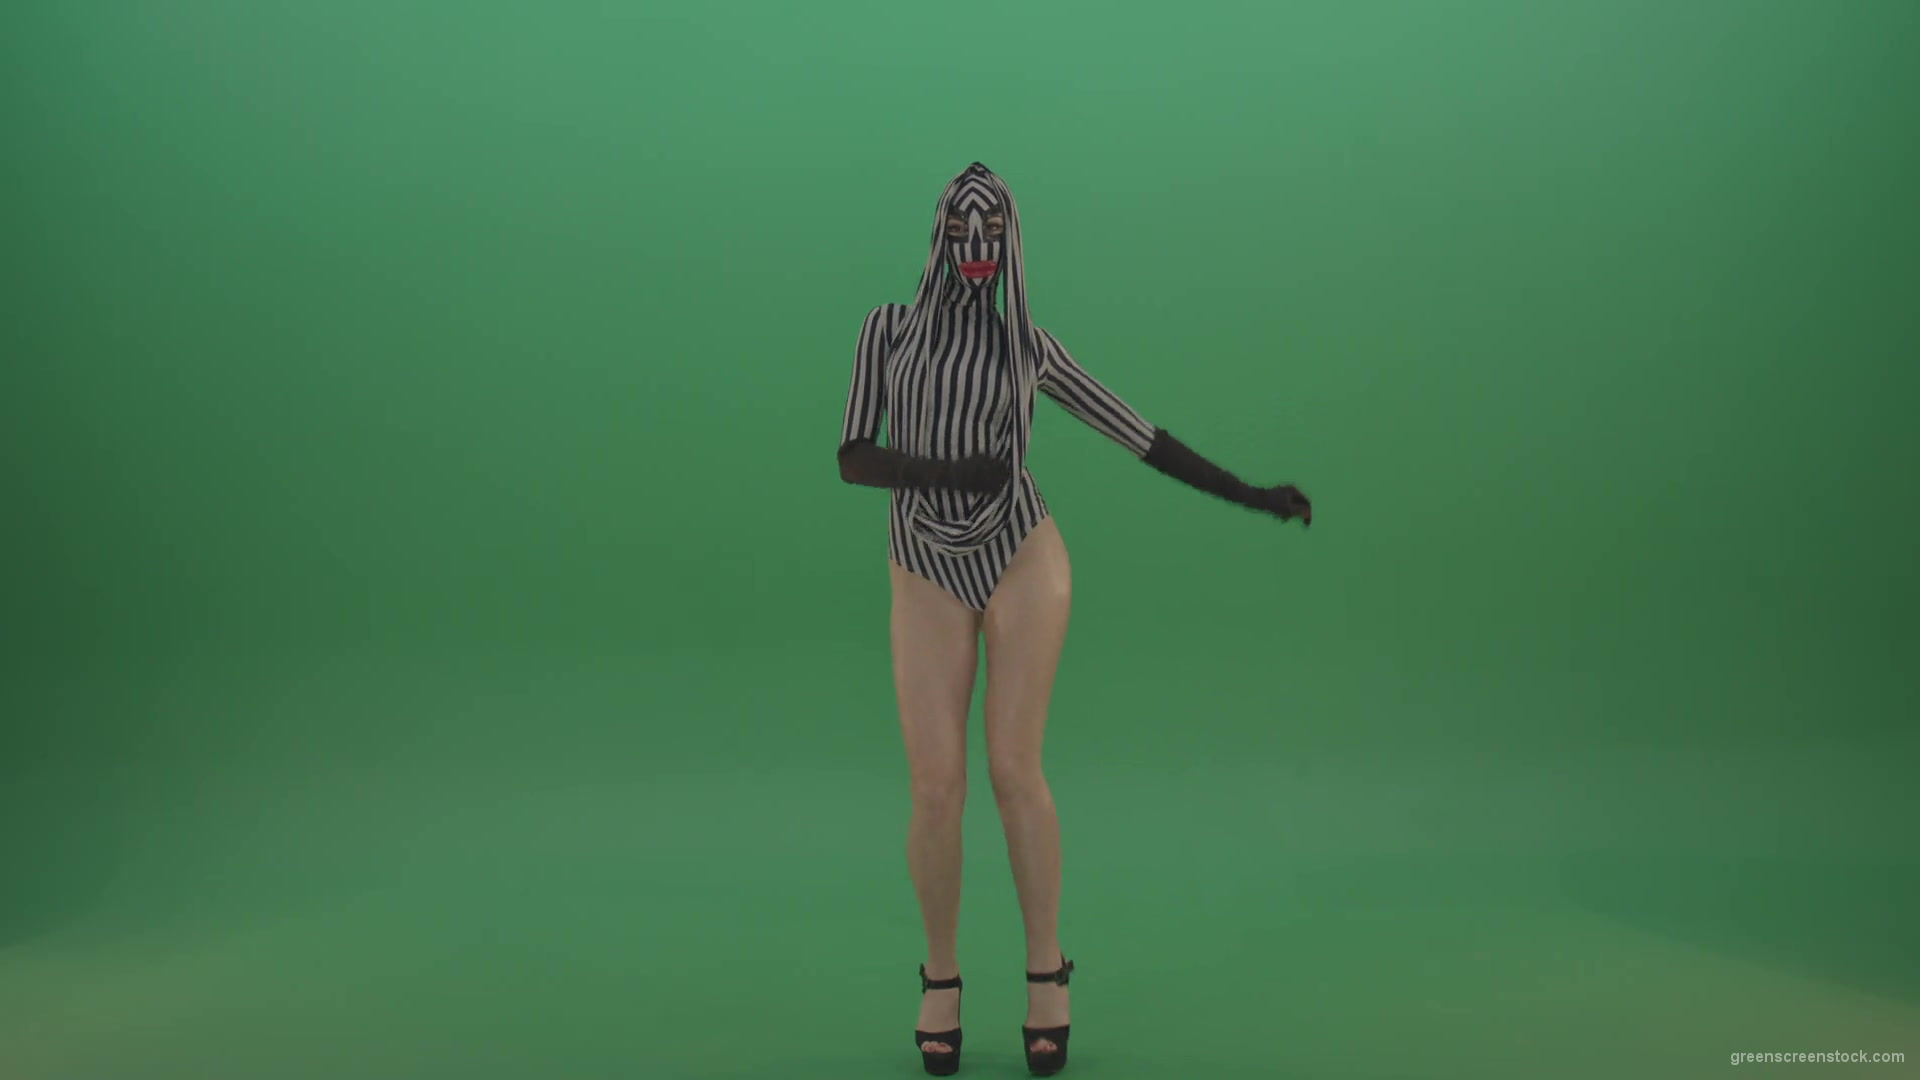 Long-legs-girl-march-in-white-black-stripe-costume-and-mask-on-green-screen-1920_007 Green Screen Stock